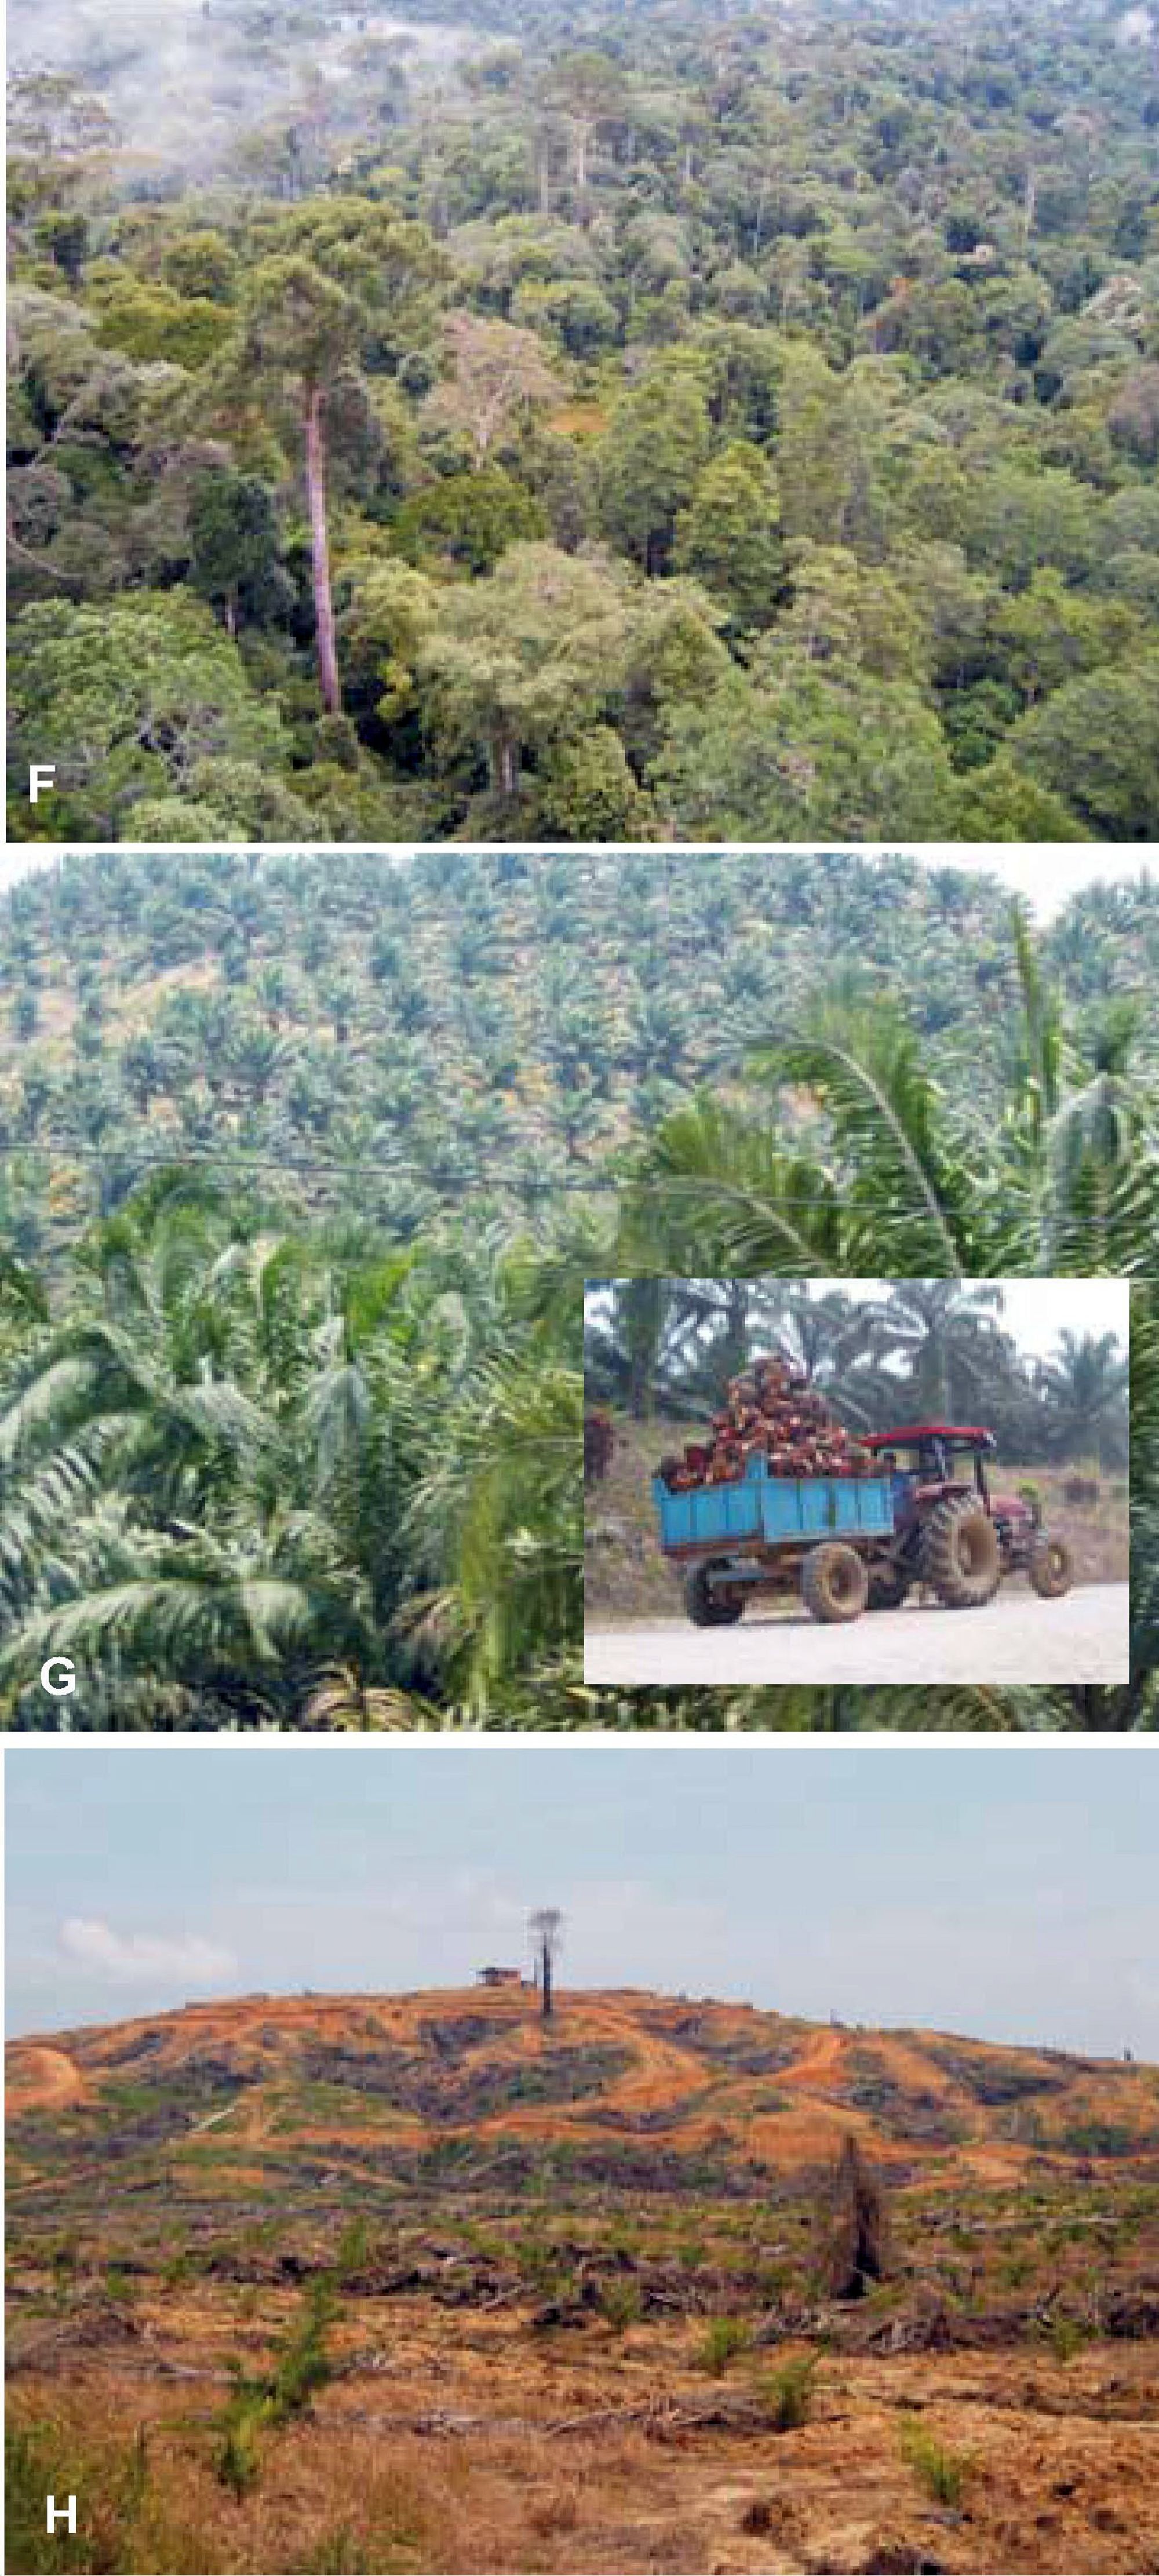 In Borneo, the forest (F), is being replaced by oil palm plantations (G). These changes are irreversible for all practical purposes (H). Source: https://en.wikipedia.org/wiki/Palm_oil#/media/File:Palm_forest.jpg